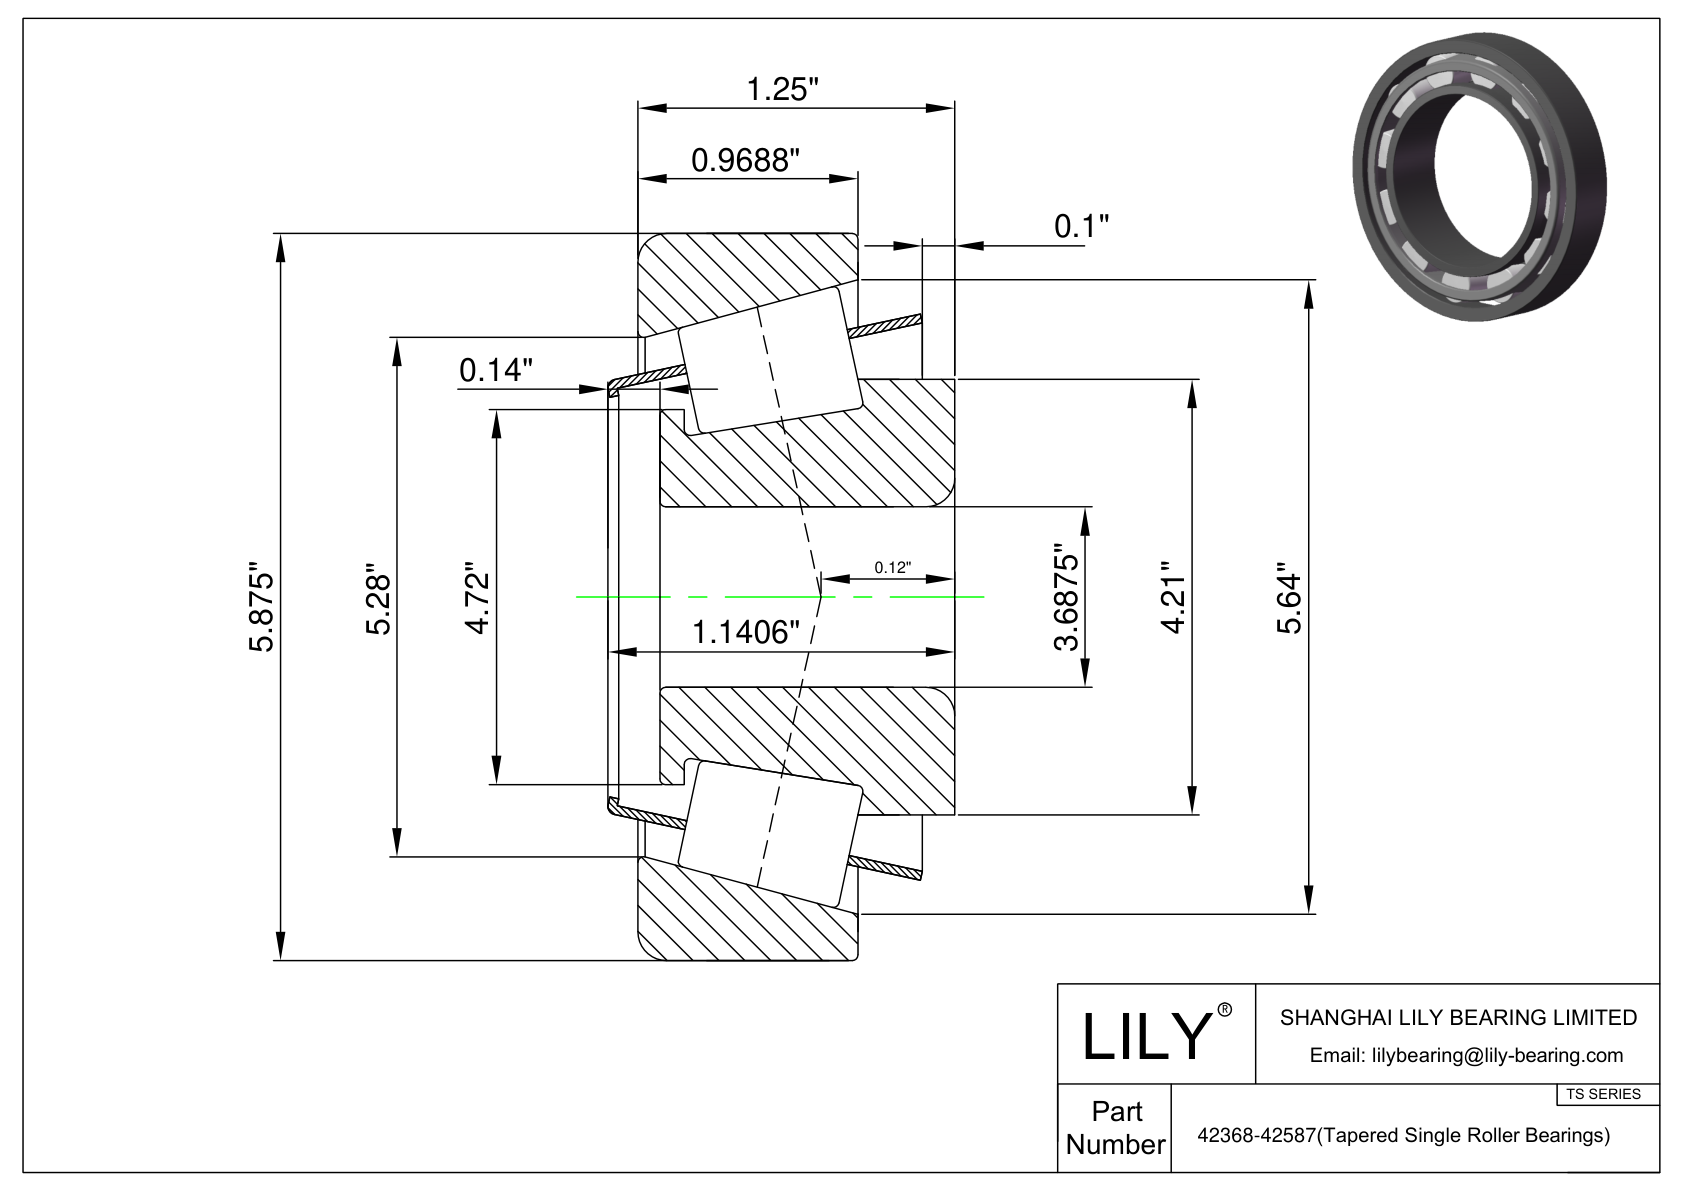 42368-42587 TS (Tapered Single Roller Bearings) (Imperial) cad drawing